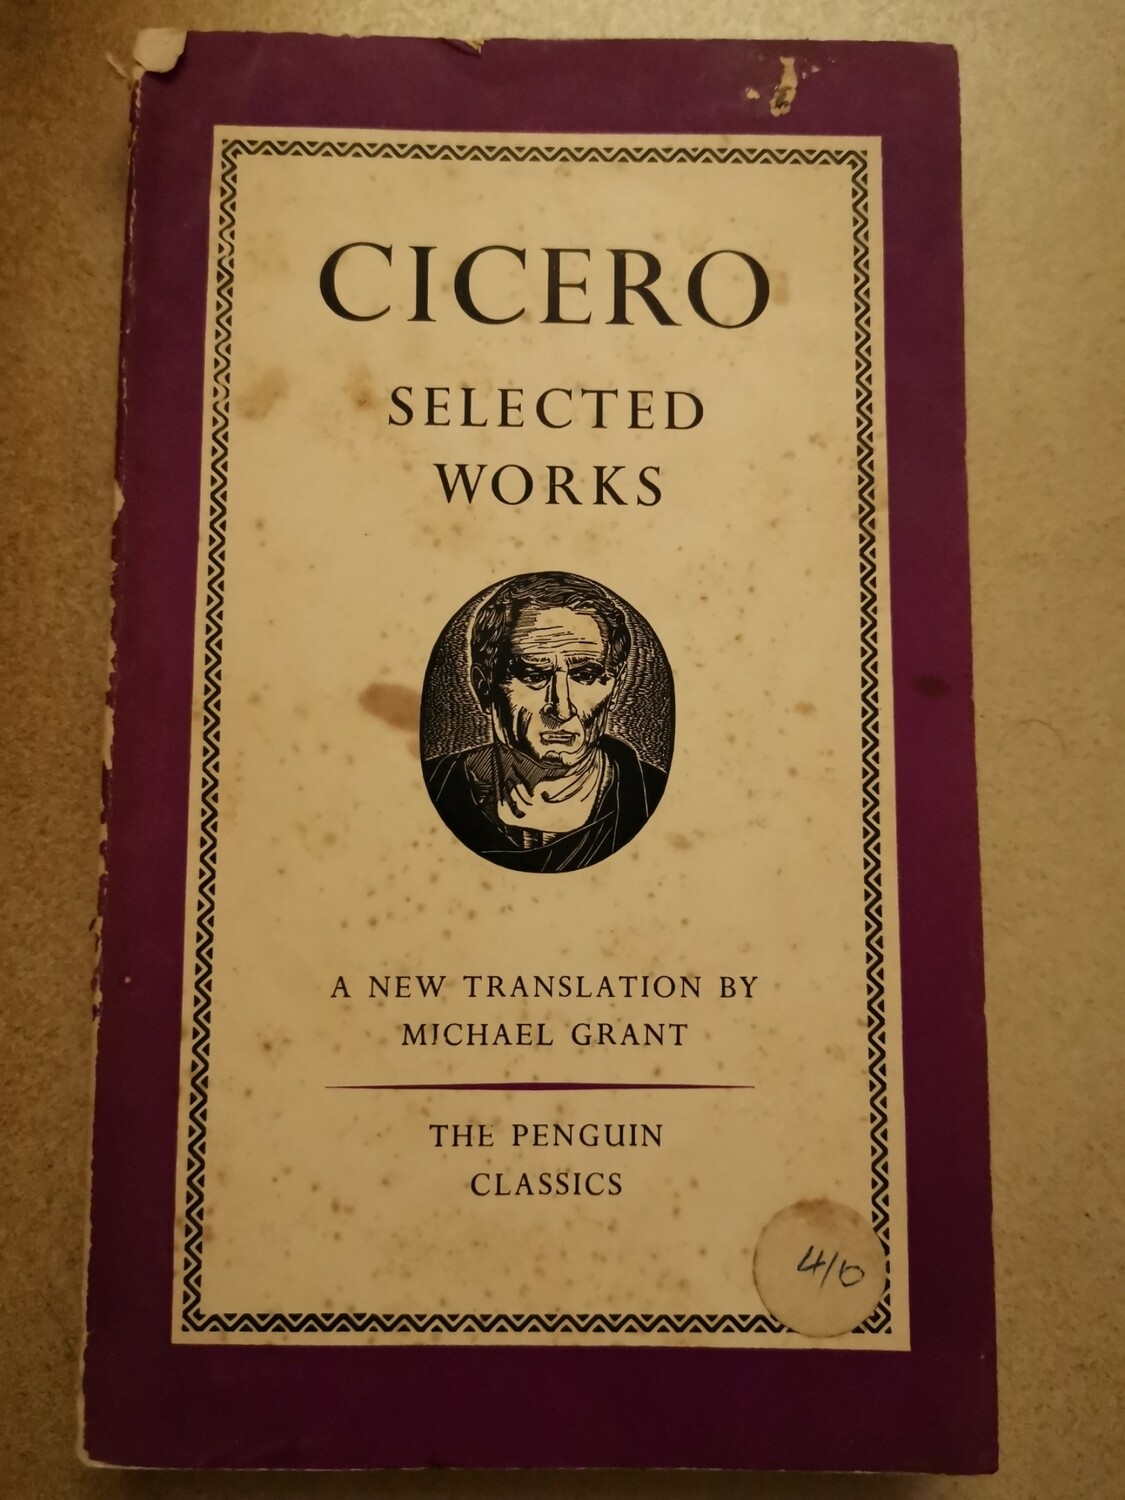 Cicero selected works, a new translation by Michael Grant